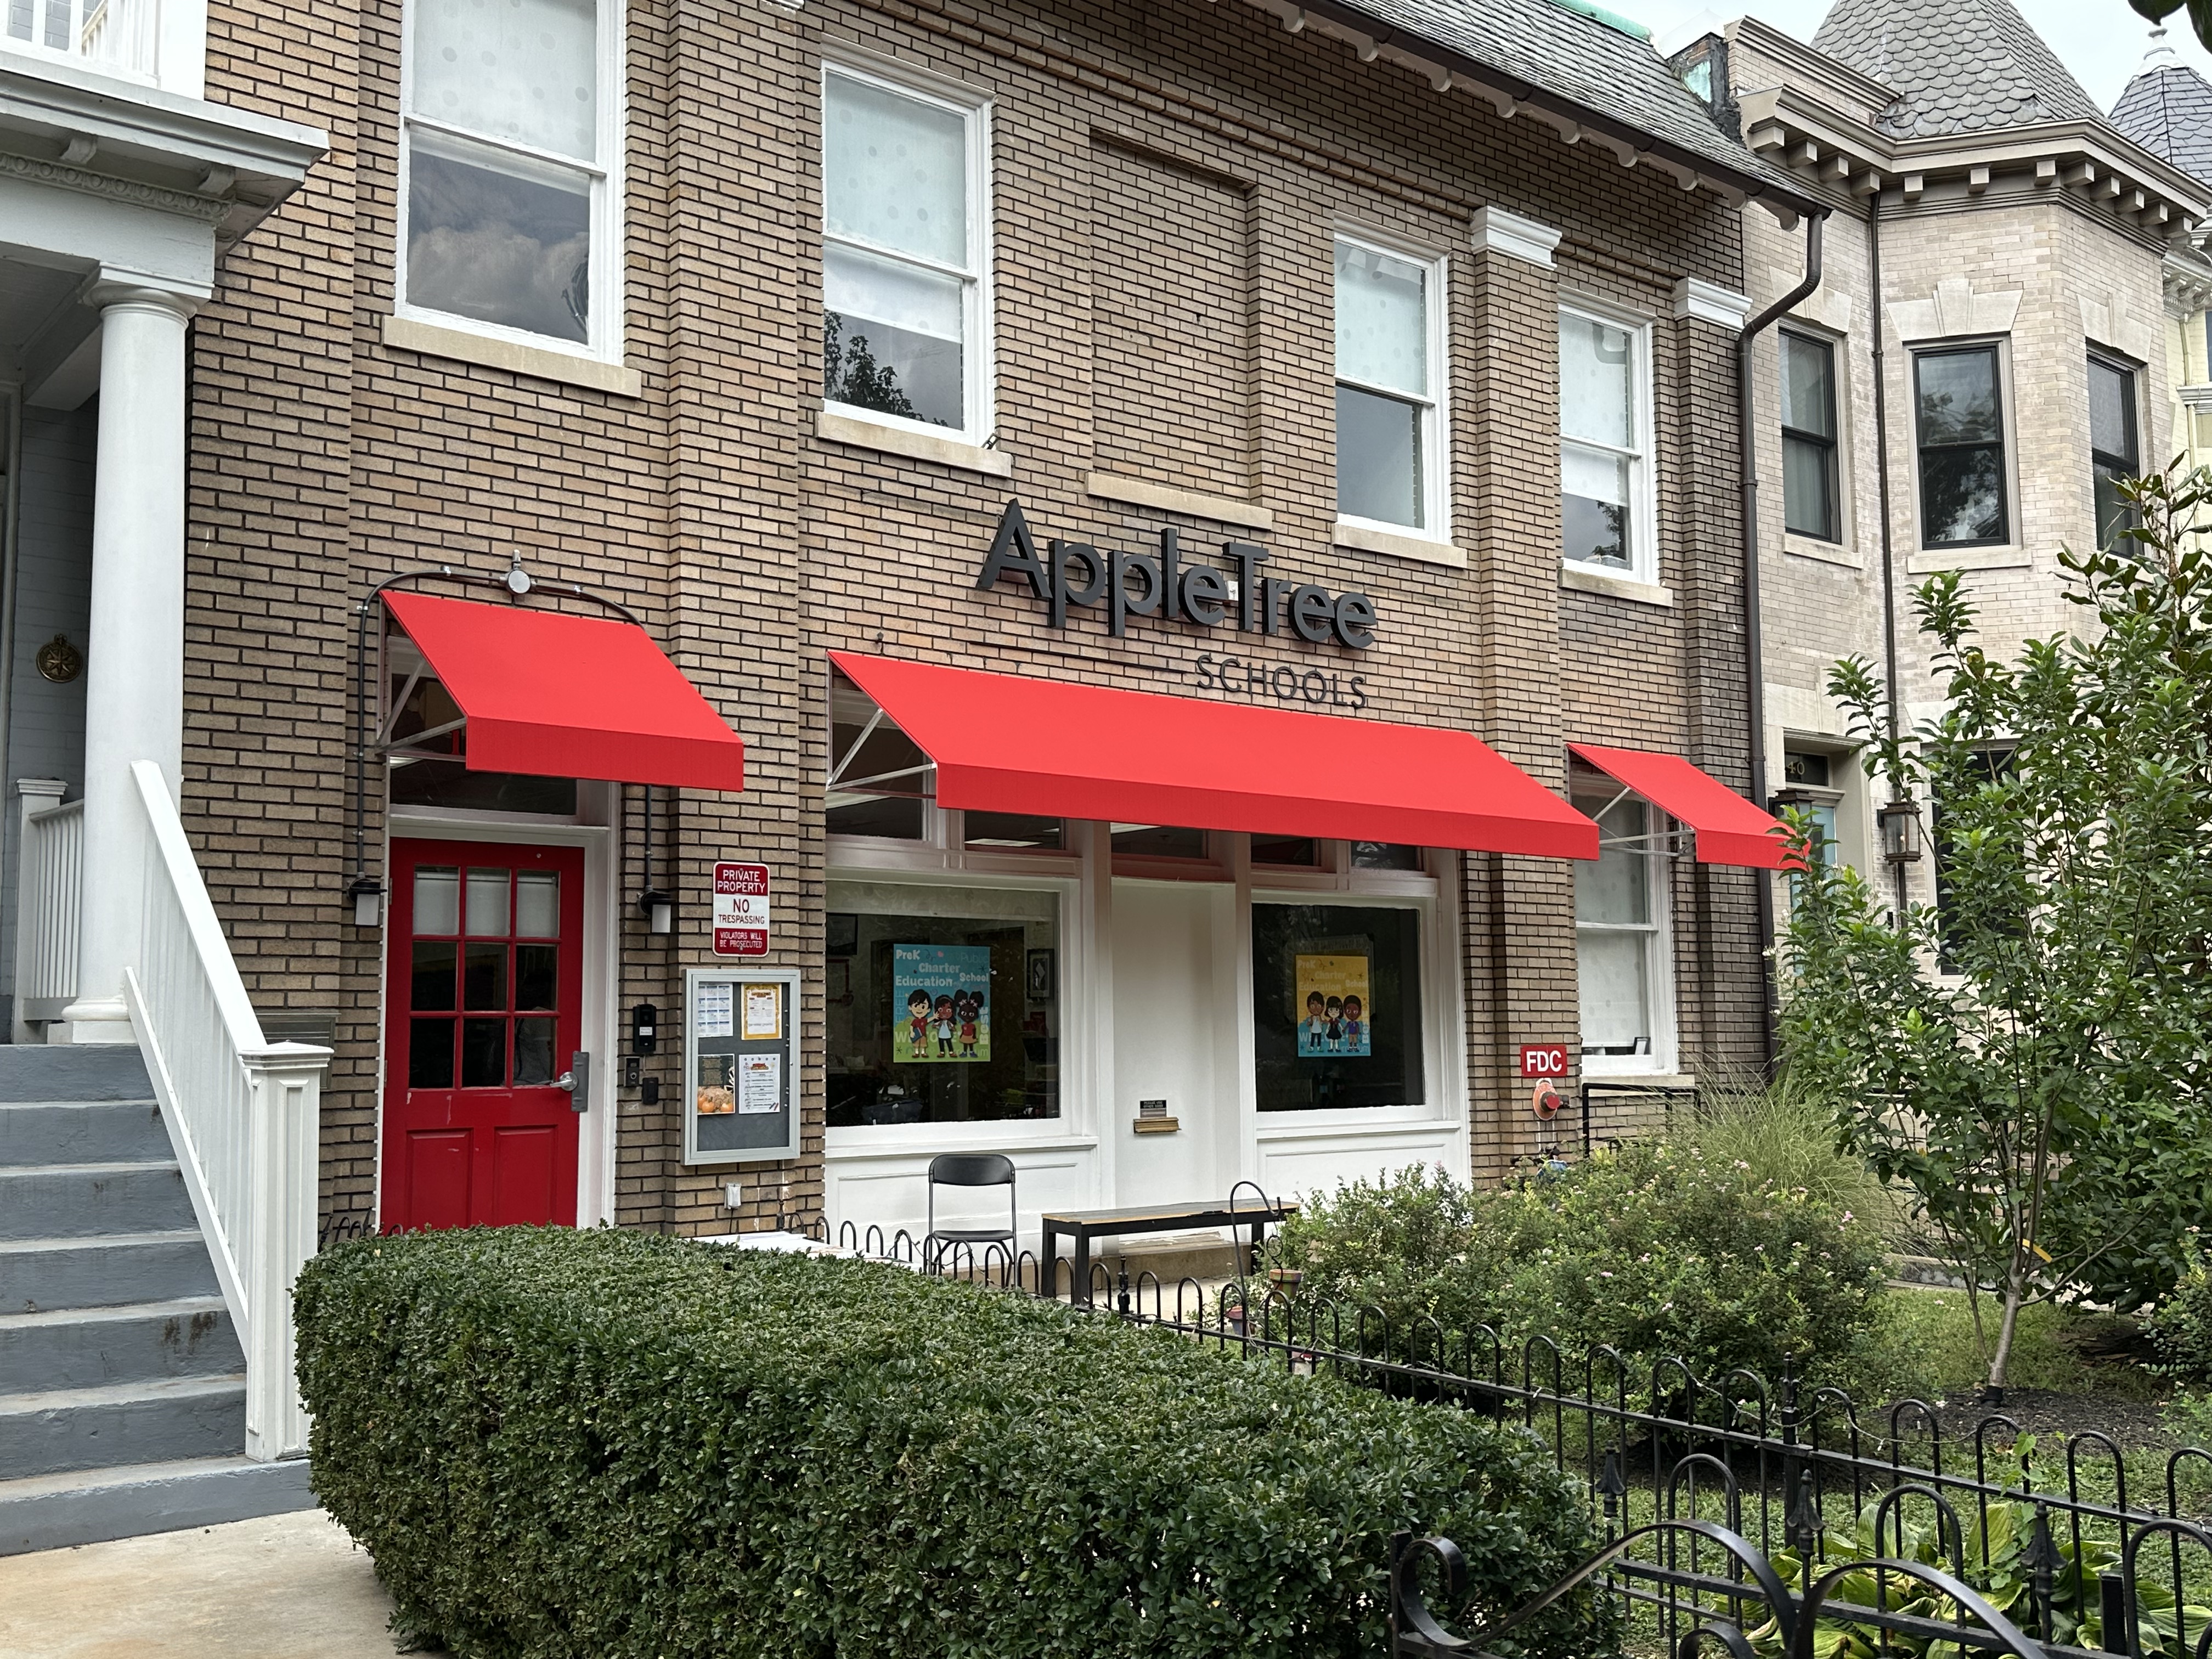 AppleTree Early Learning PCS - Lincoln Park